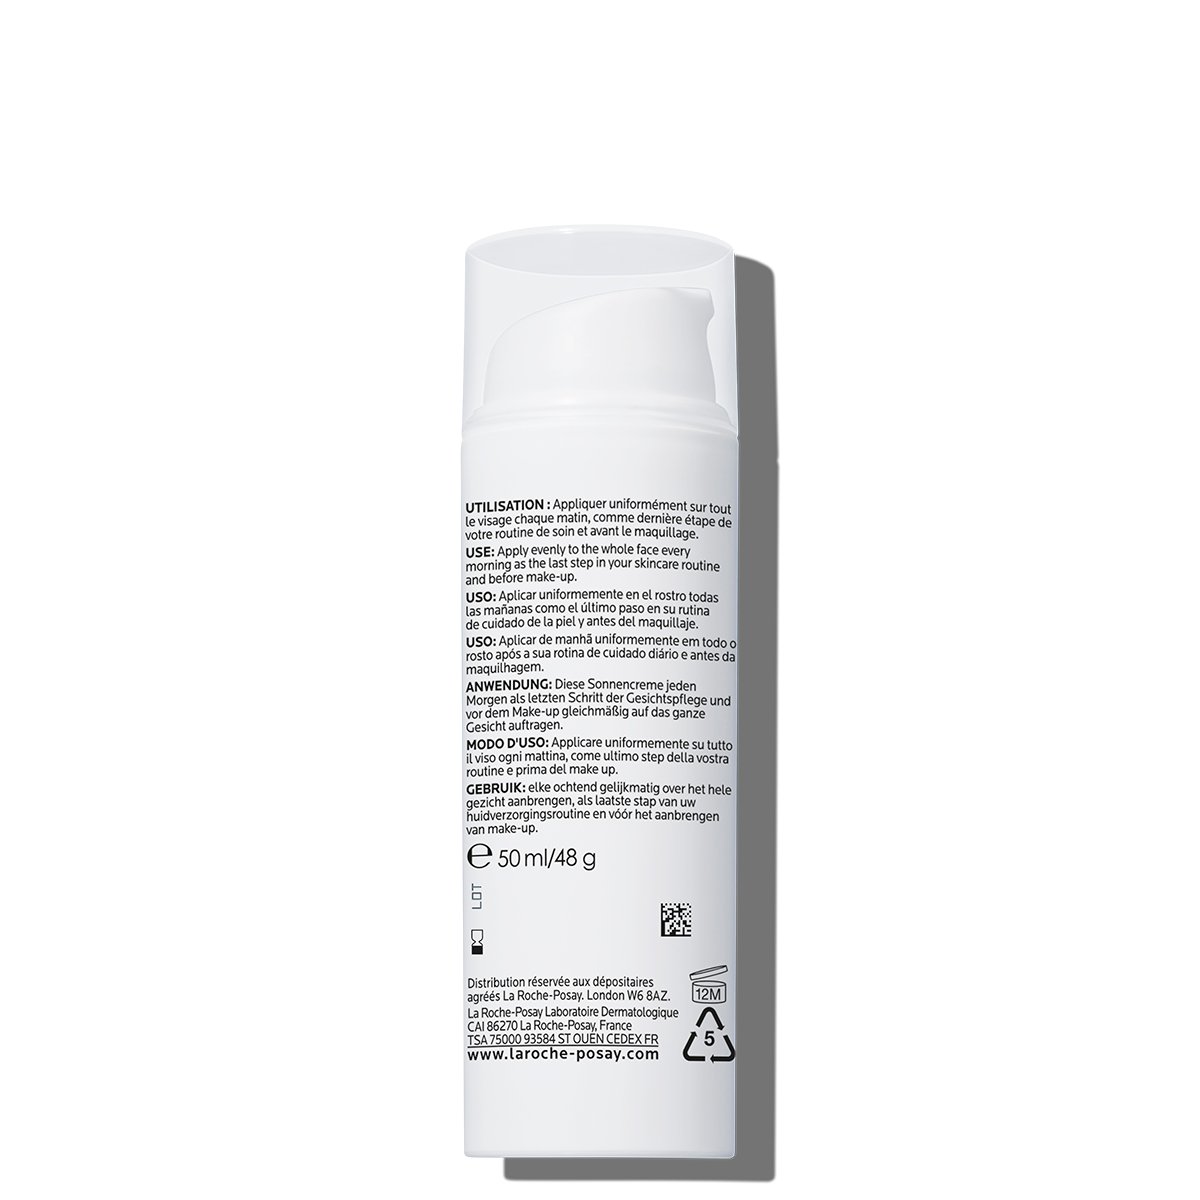 La-Roche-Posay-Anthelios-Age-Correct-SPF50-50ml-NoTeinted